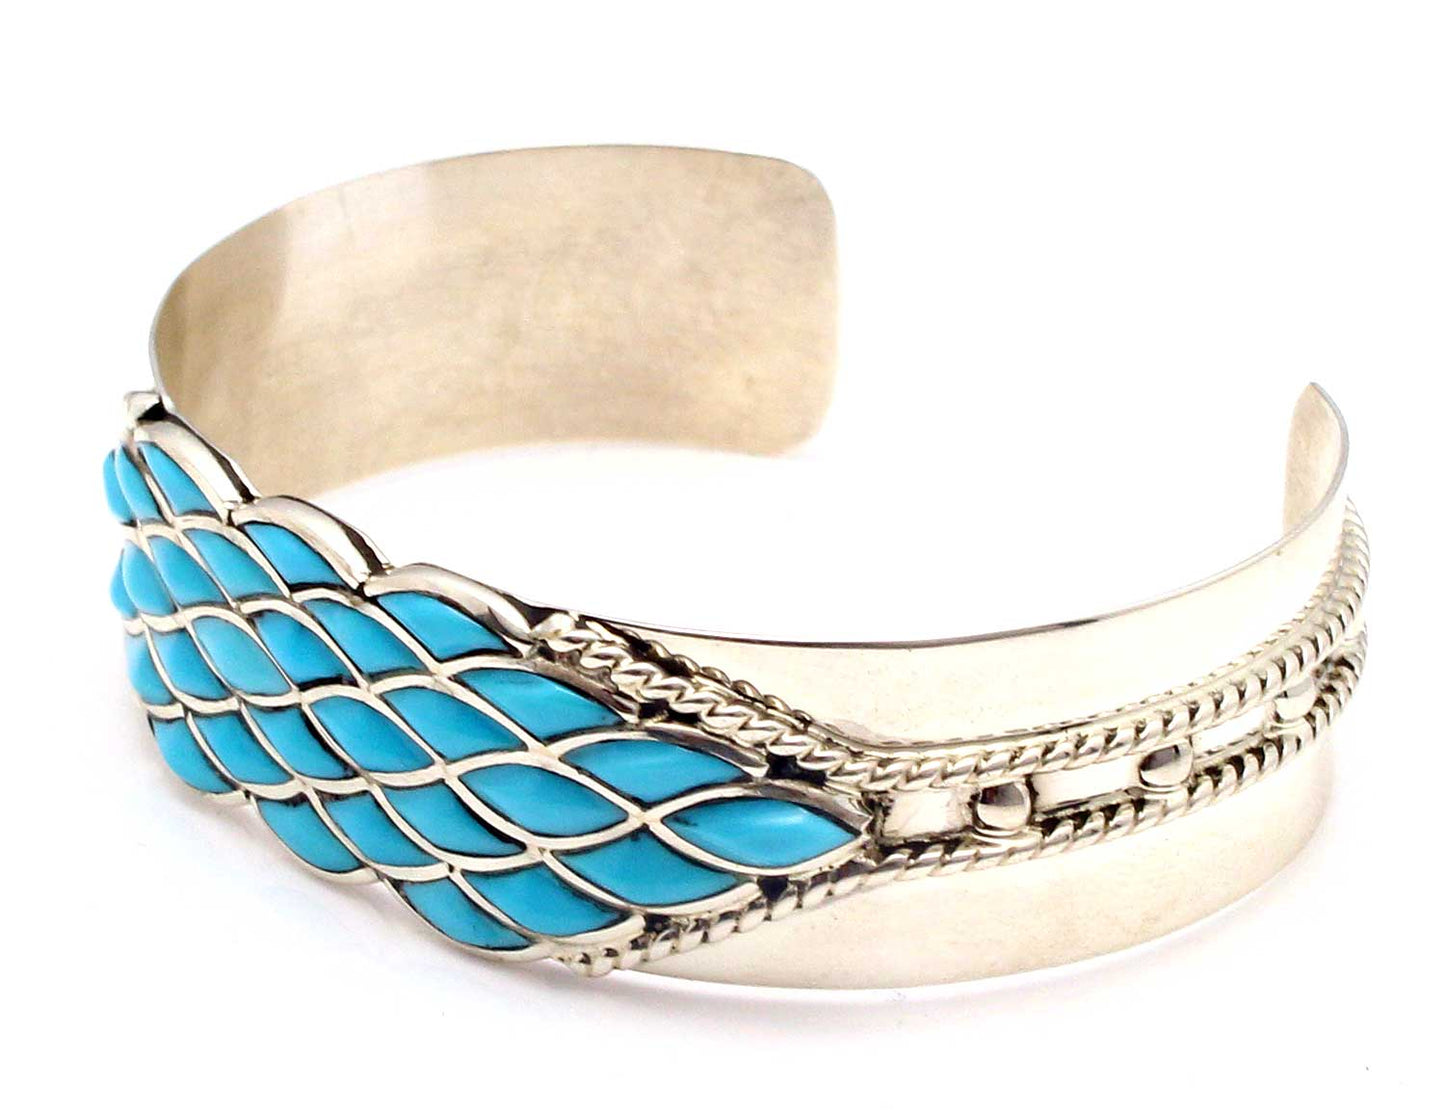 Zuni Turquoise Channel Inlay Bracelet by Chavez